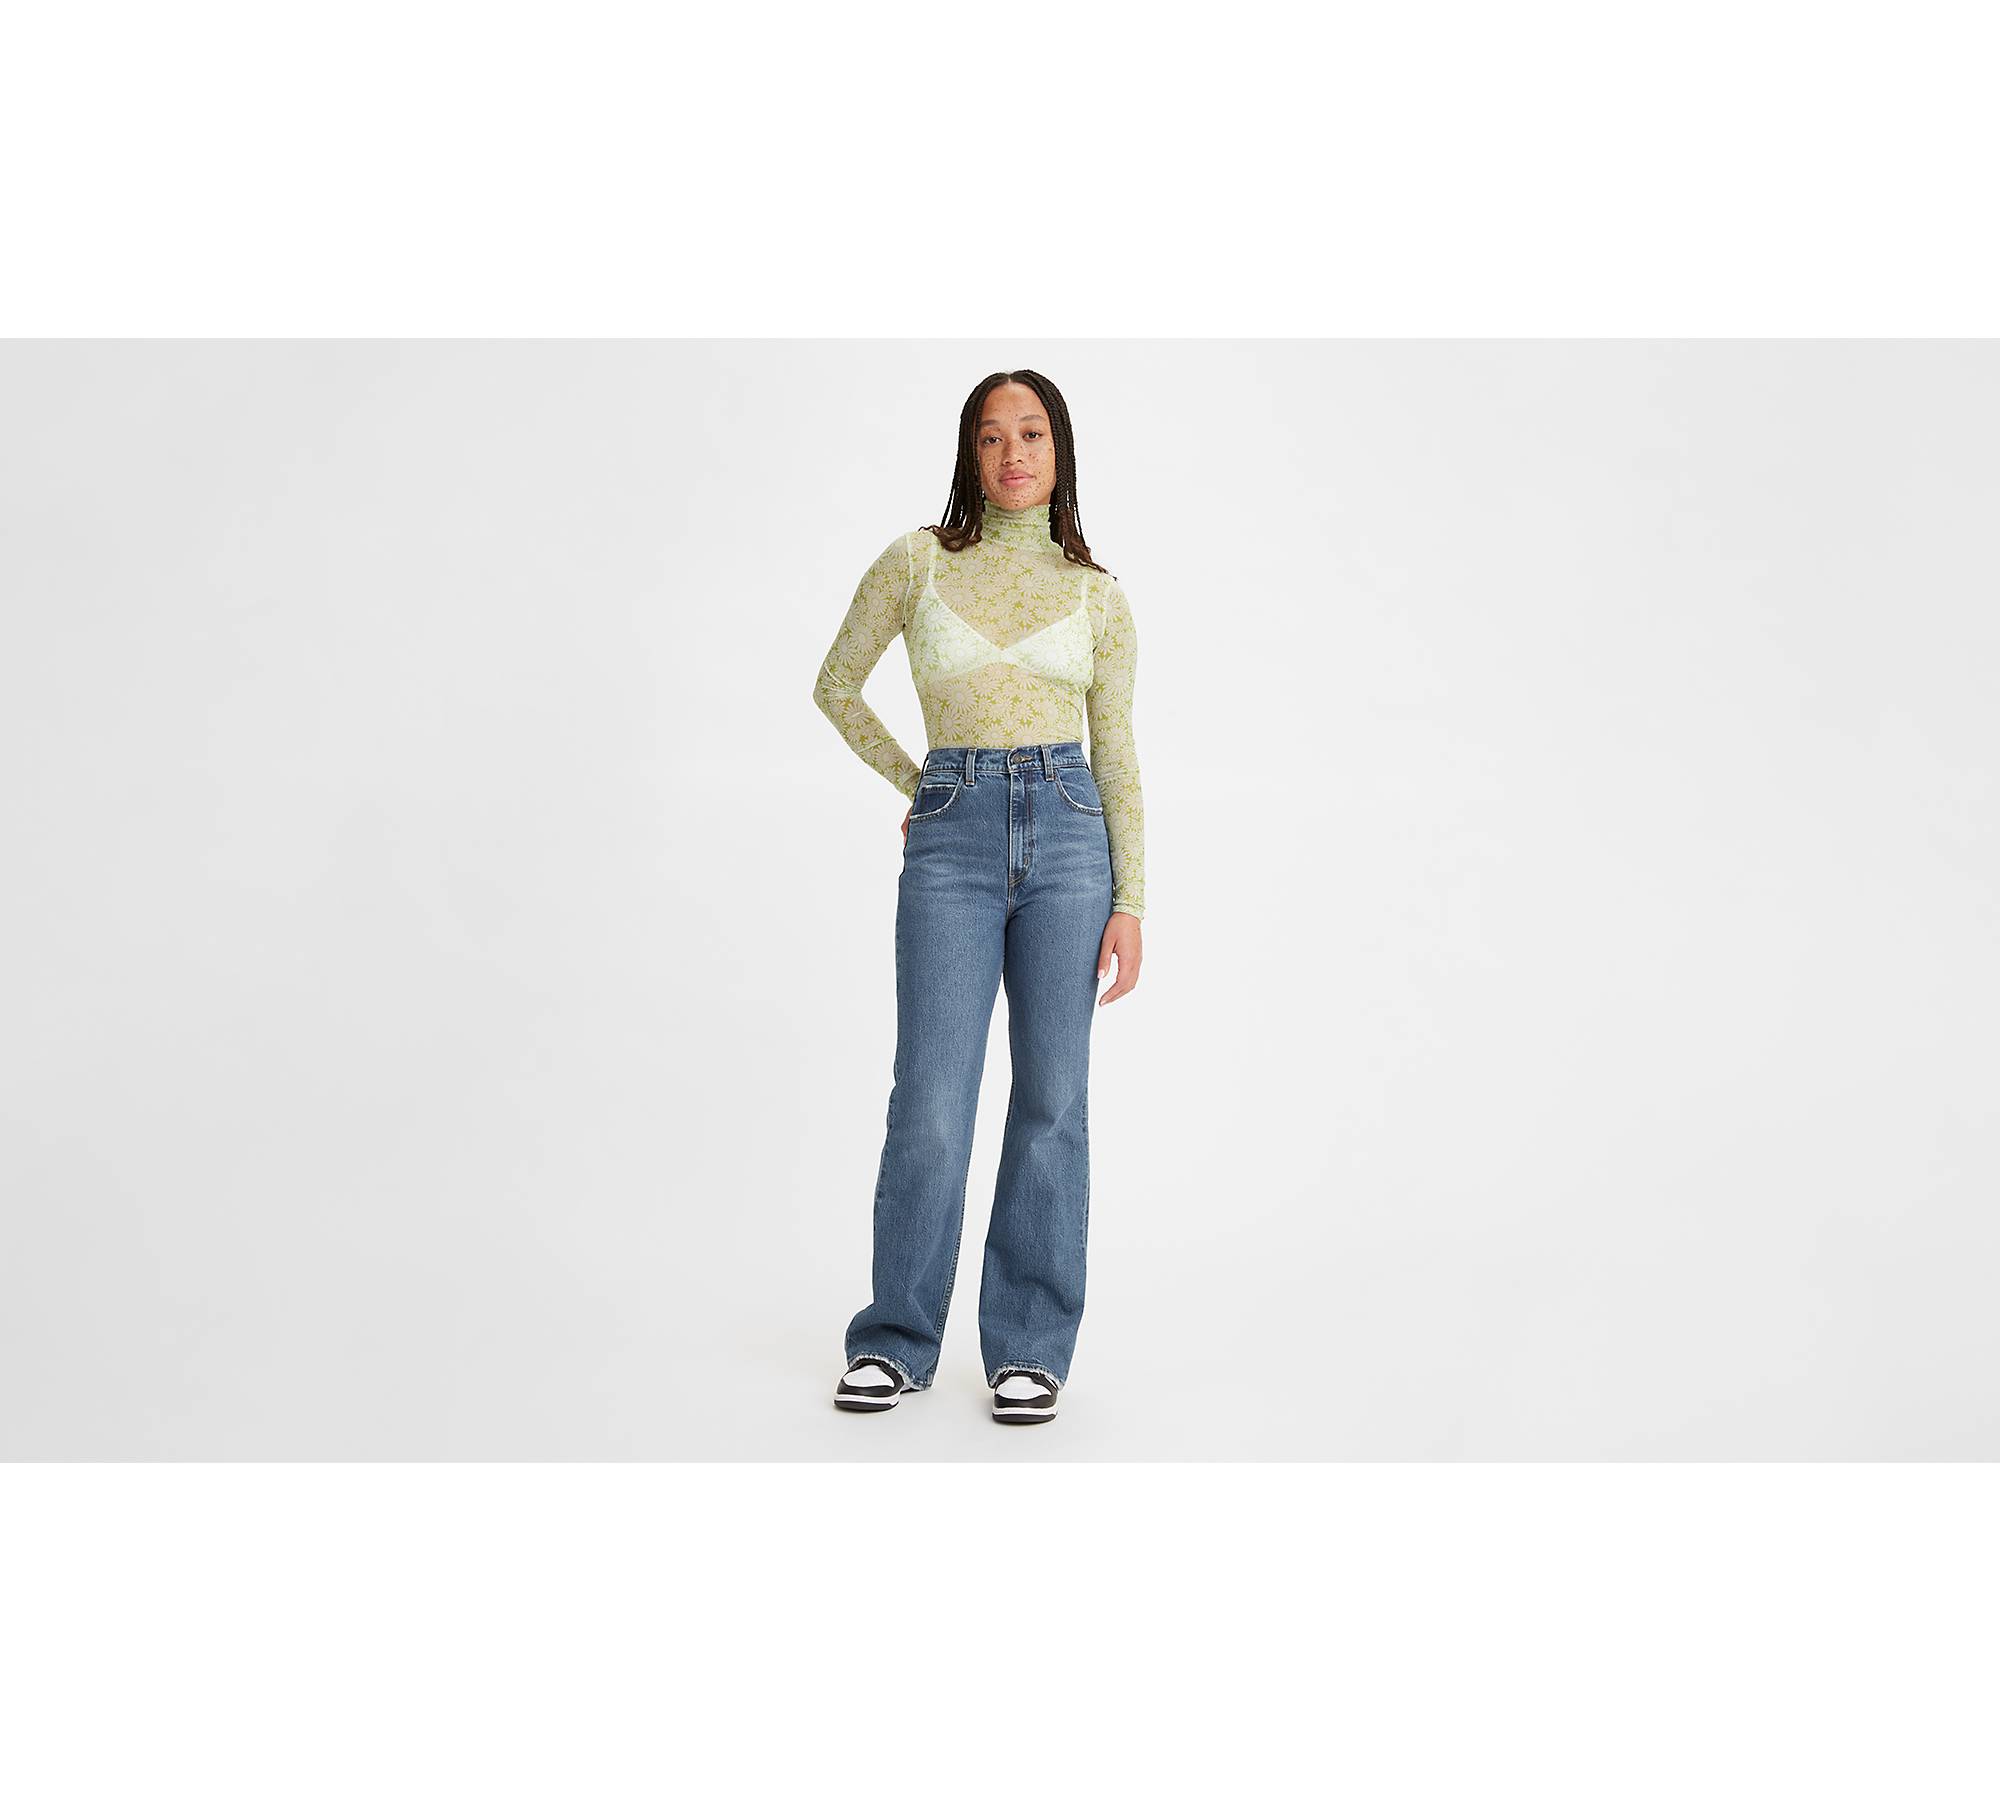 70's High Rise Flare Women's Jeans - Light Wash